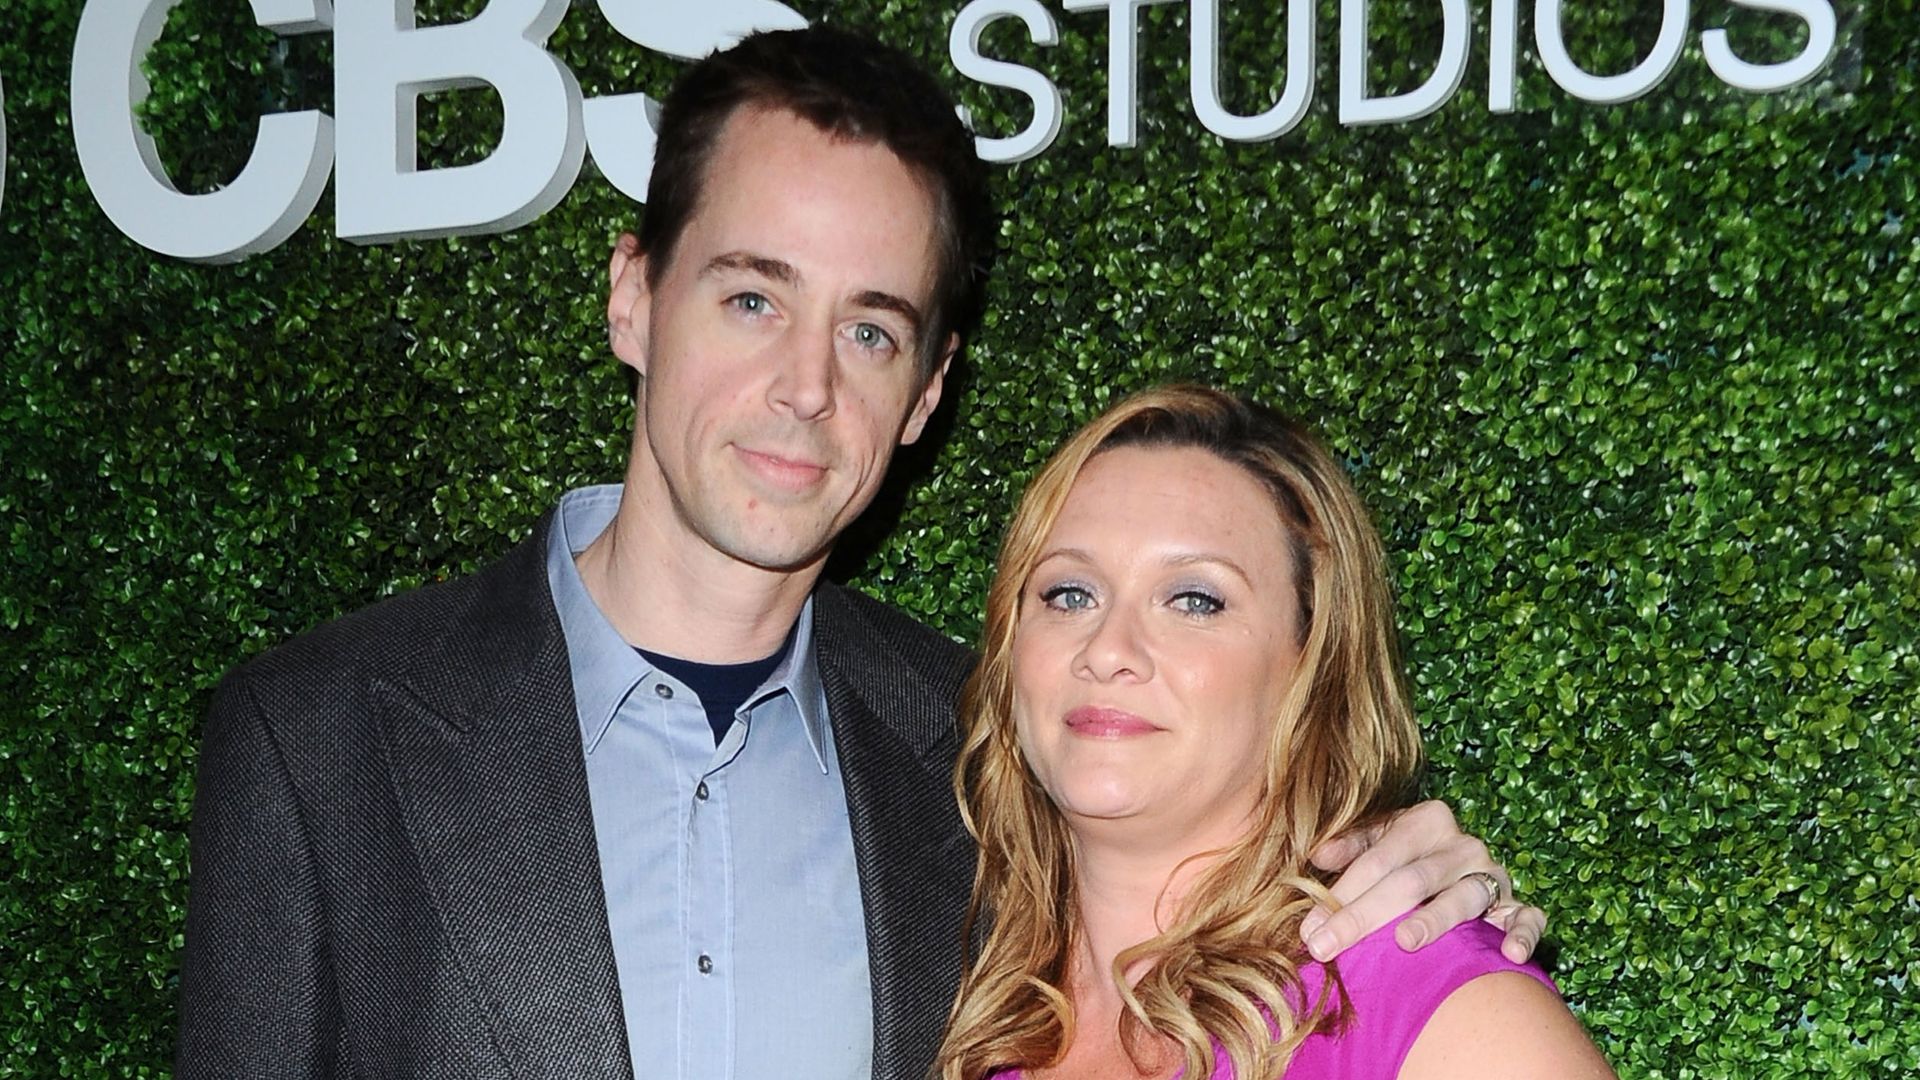 Sean Murray, Carrie James at the CBS Studio's Summer Soiree, Los Angeles, America in 2016